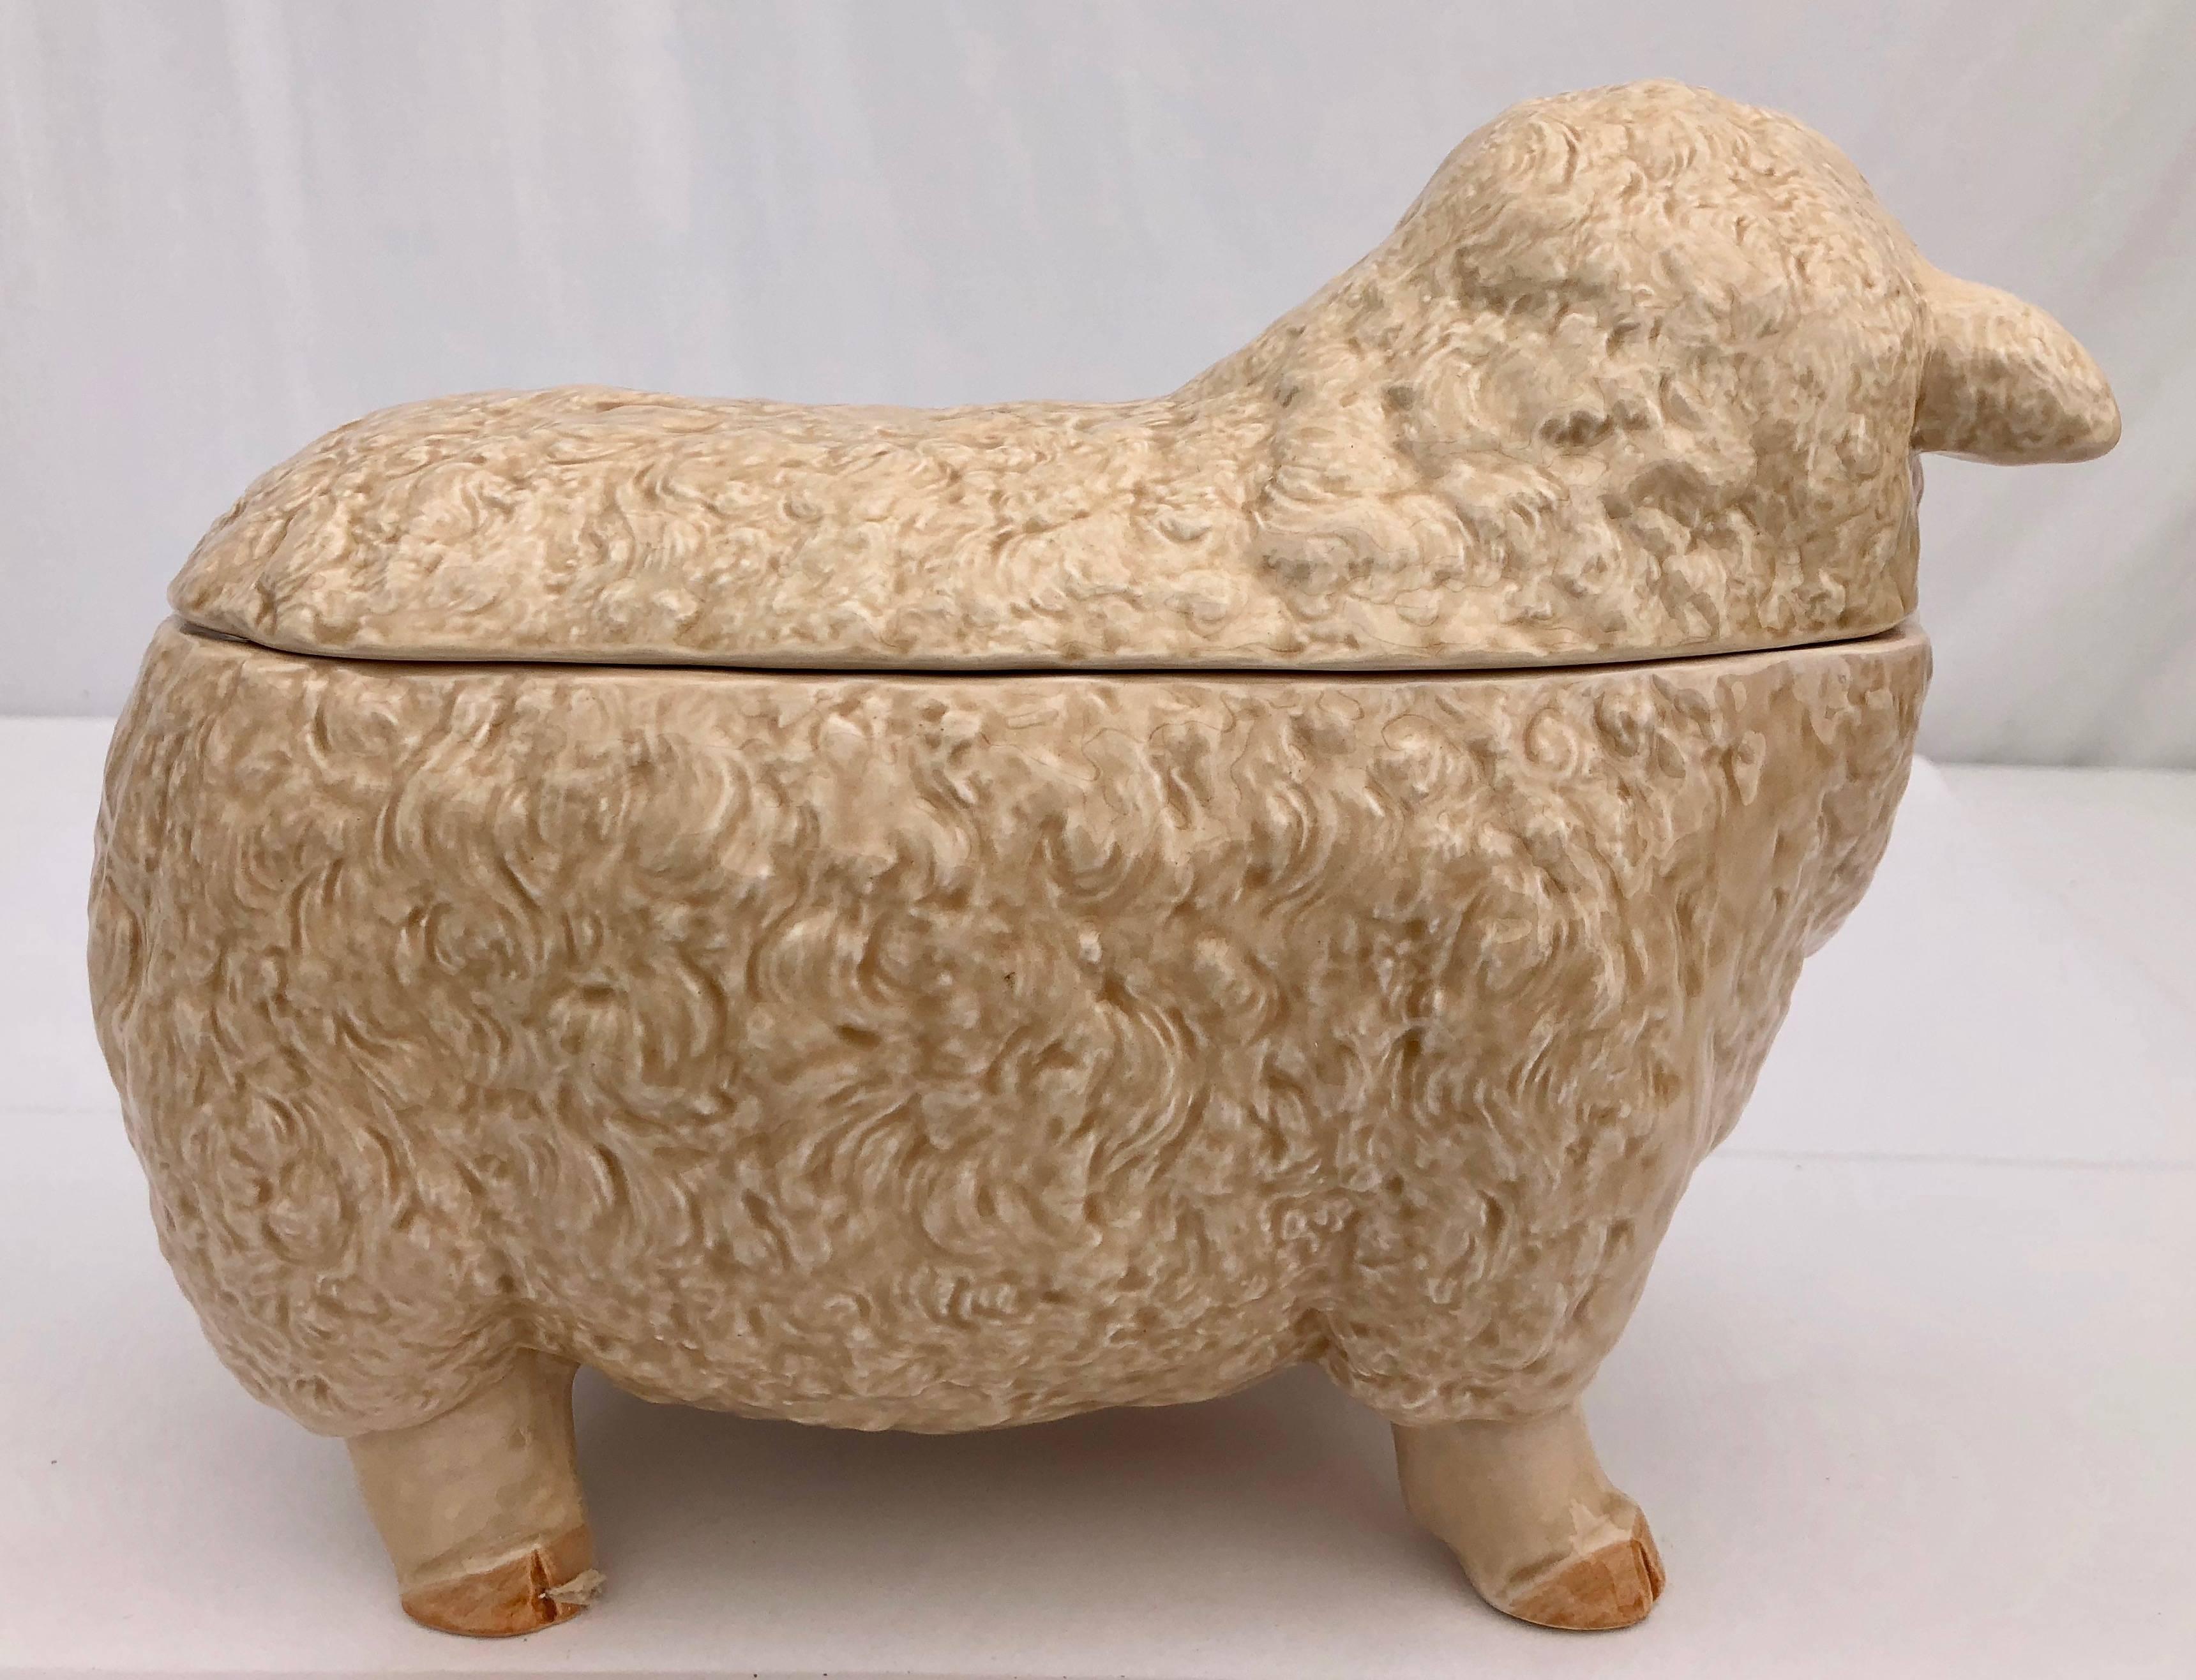 Hand-Crafted Sheep Ceramic Cookie Jar Handcrafted by Otagiri, Japan, 1984 in It's Box For Sale